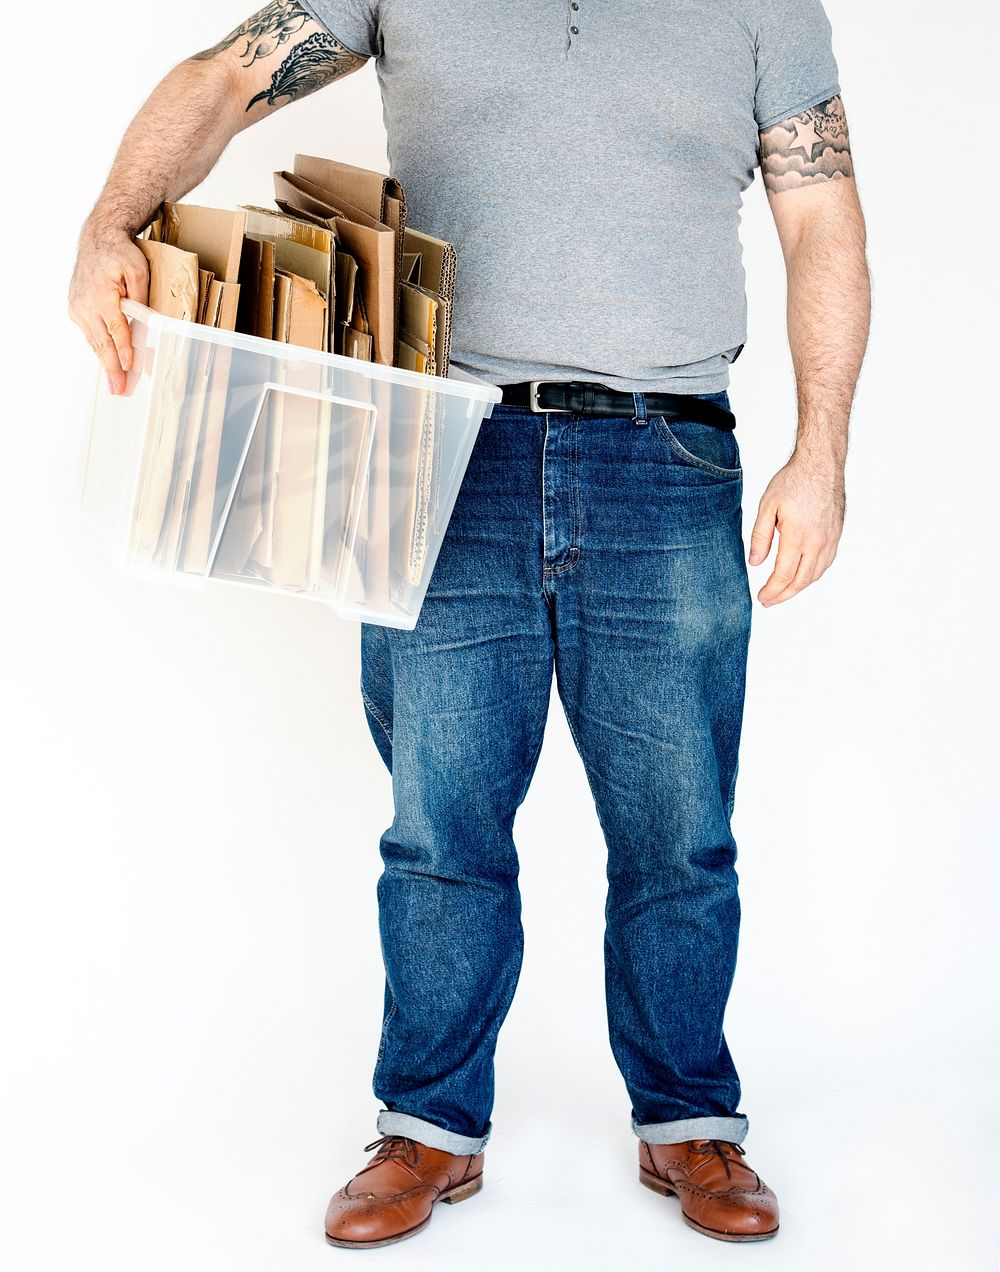 Man standing and holding box of cardboard